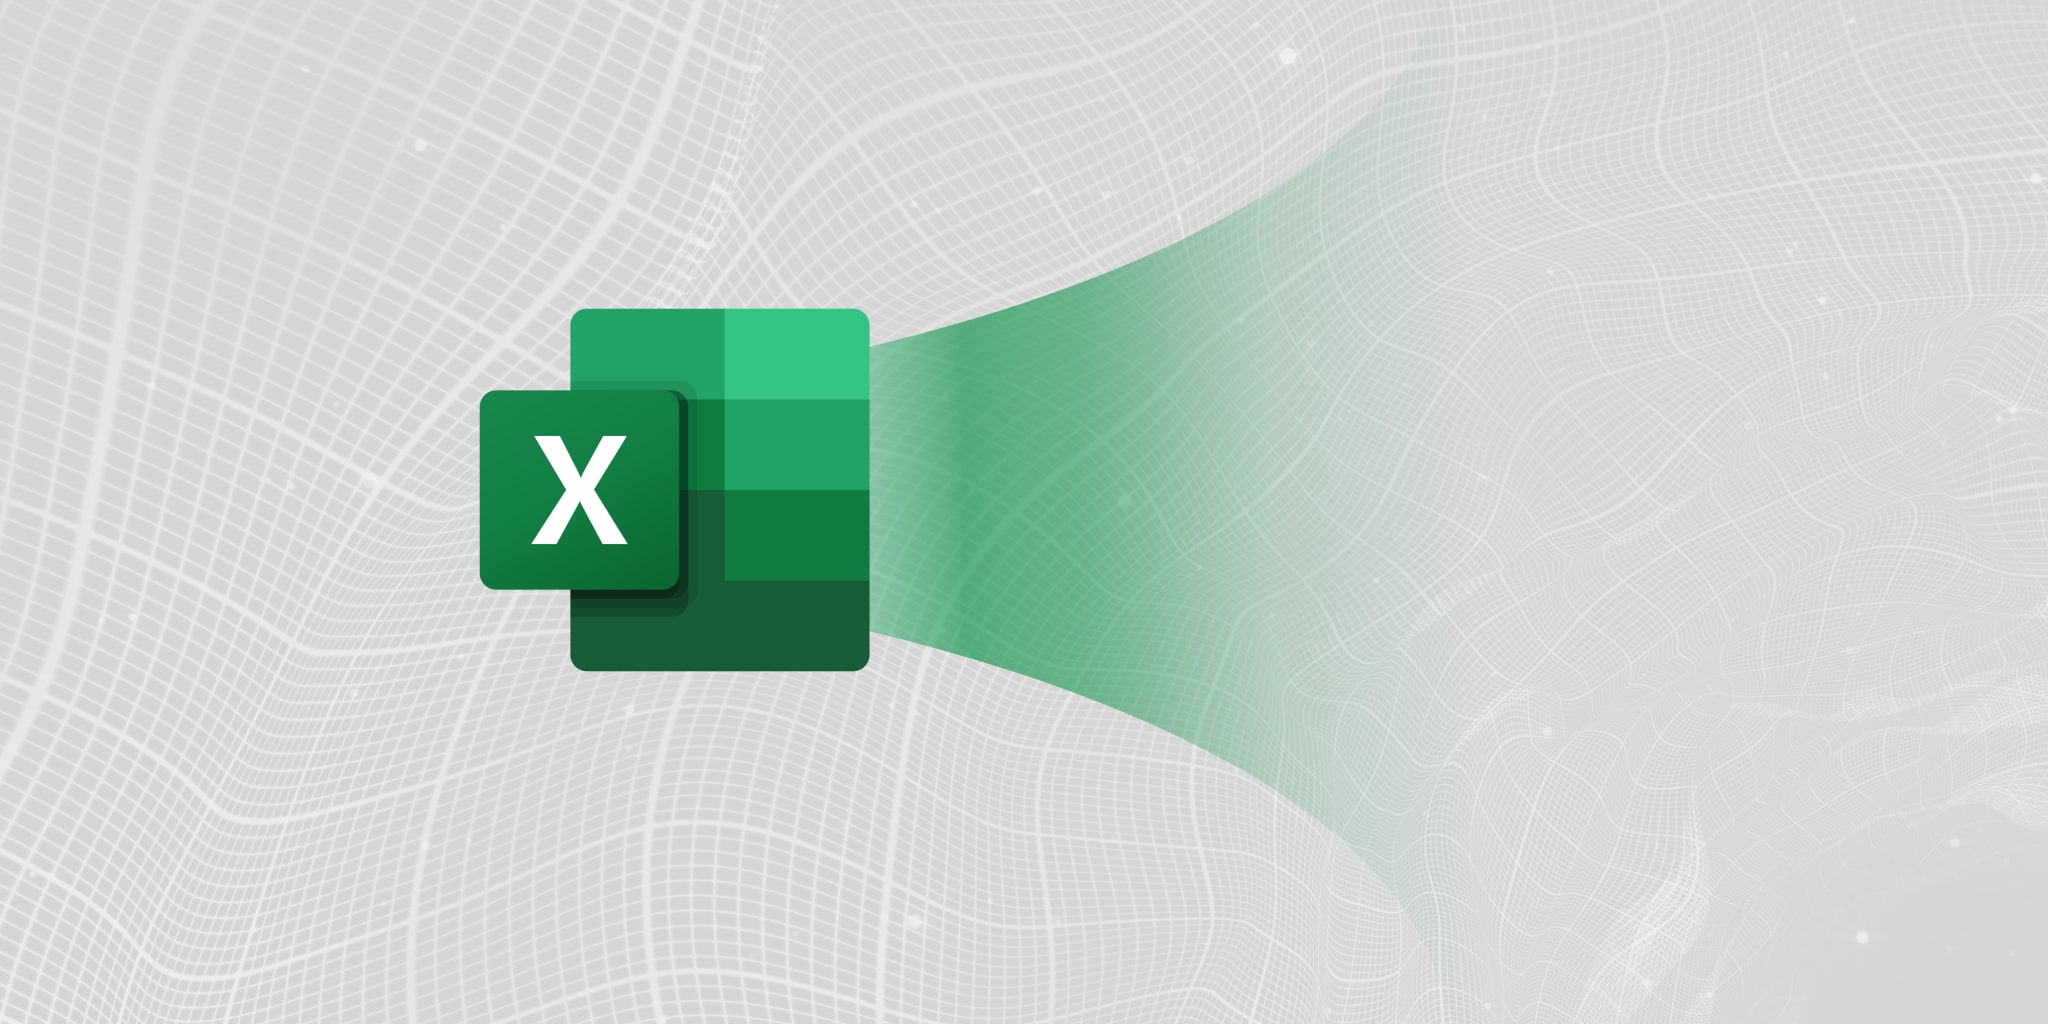 How To Build Business Forecasts With Excel